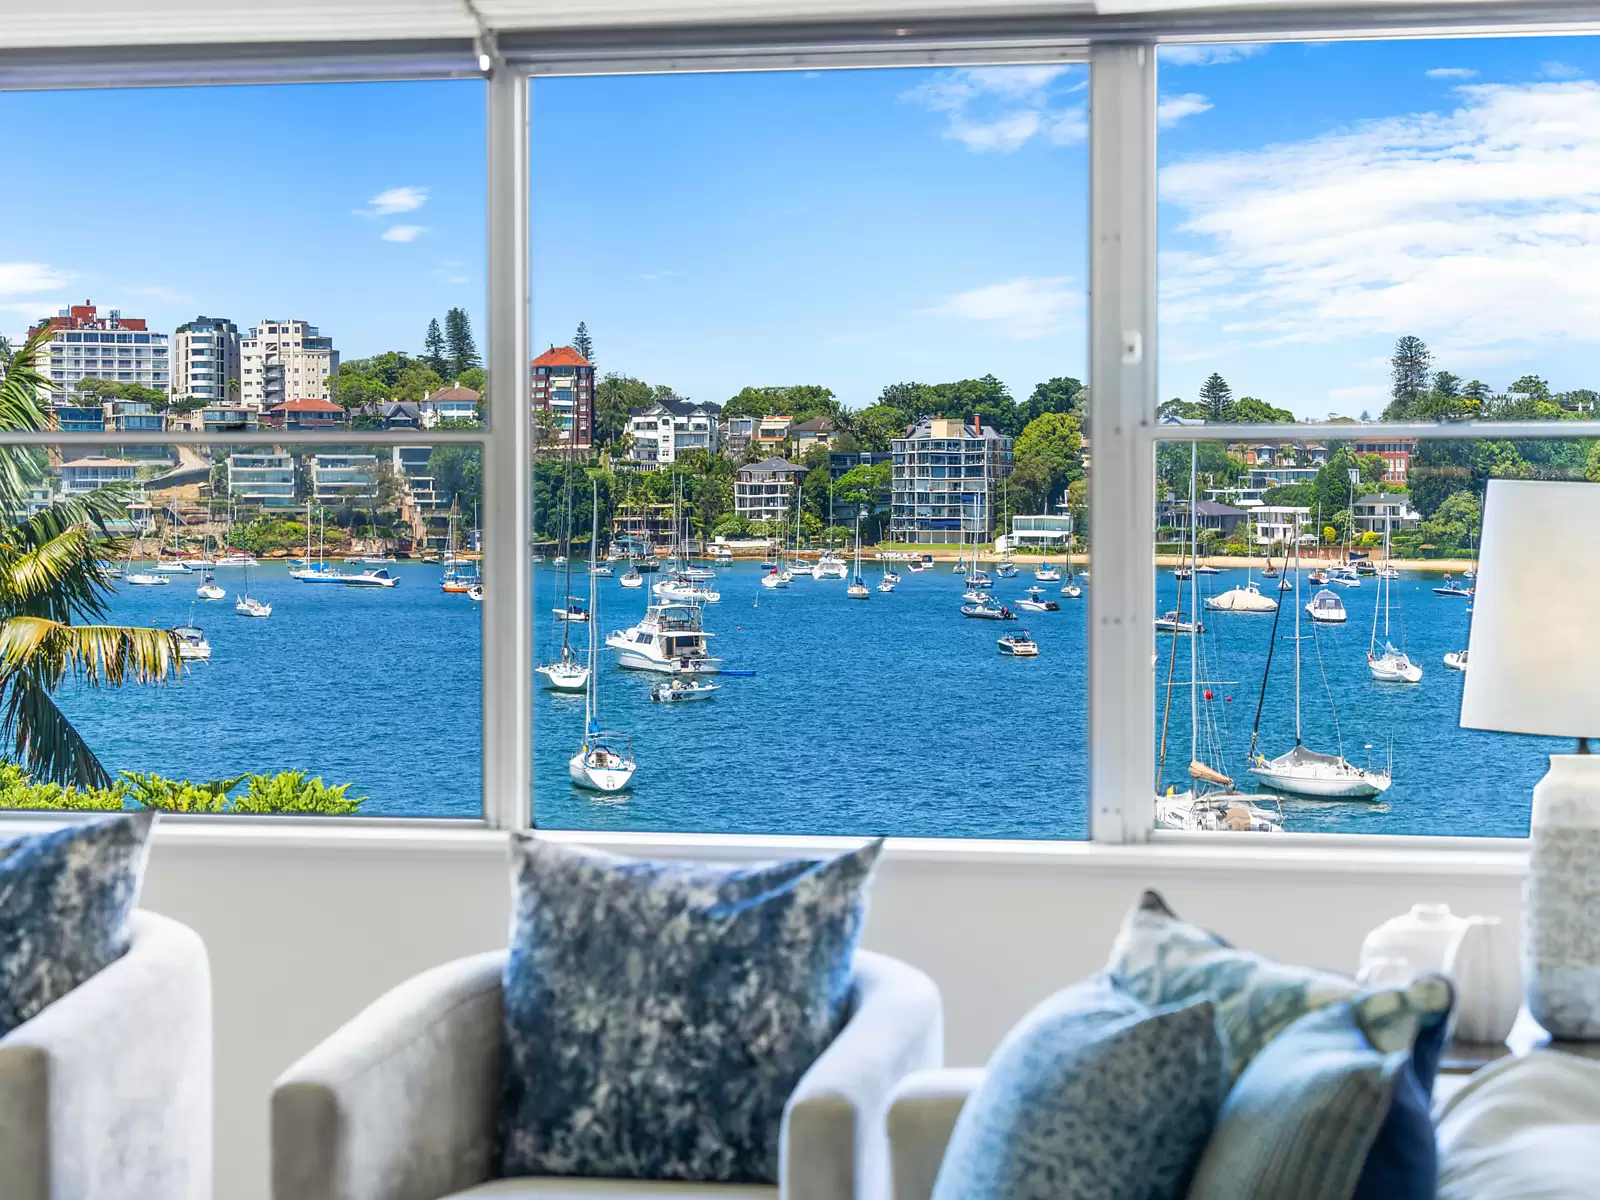 Photo #6: 2A/27 Sutherland Crescent, Darling Point - For Sale by Sydney Sotheby's International Realty